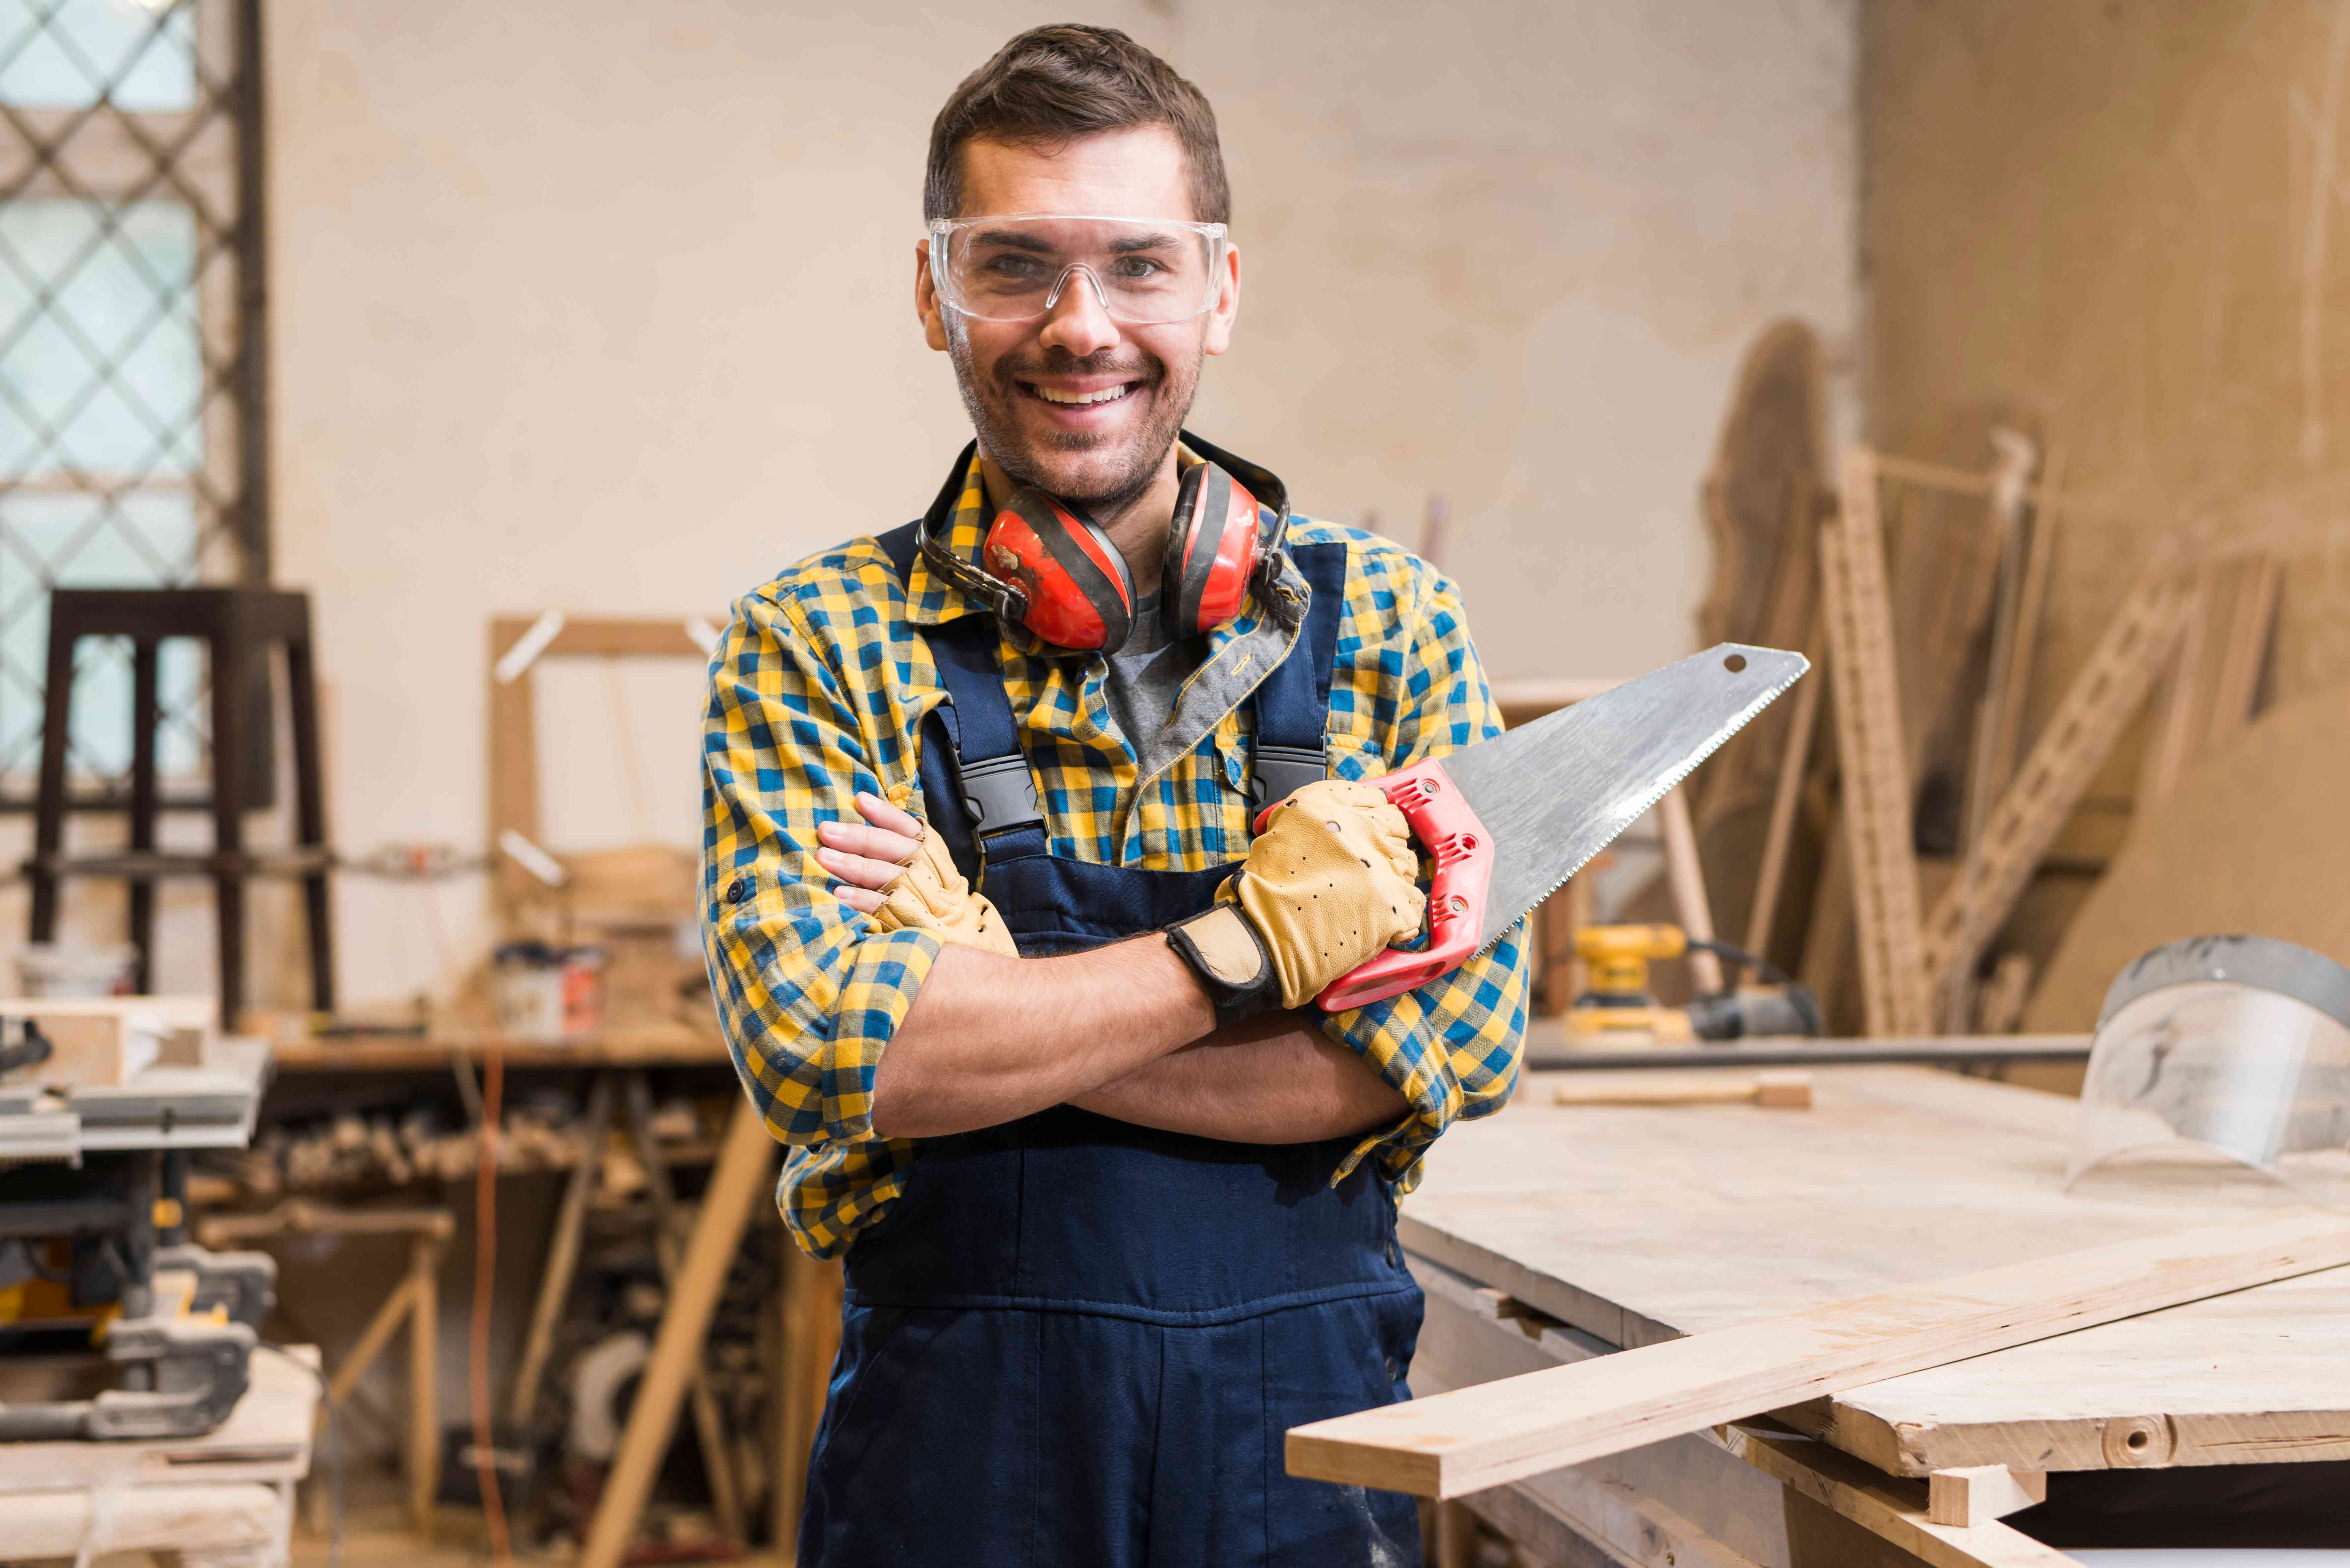 Carpentry Course for International Students